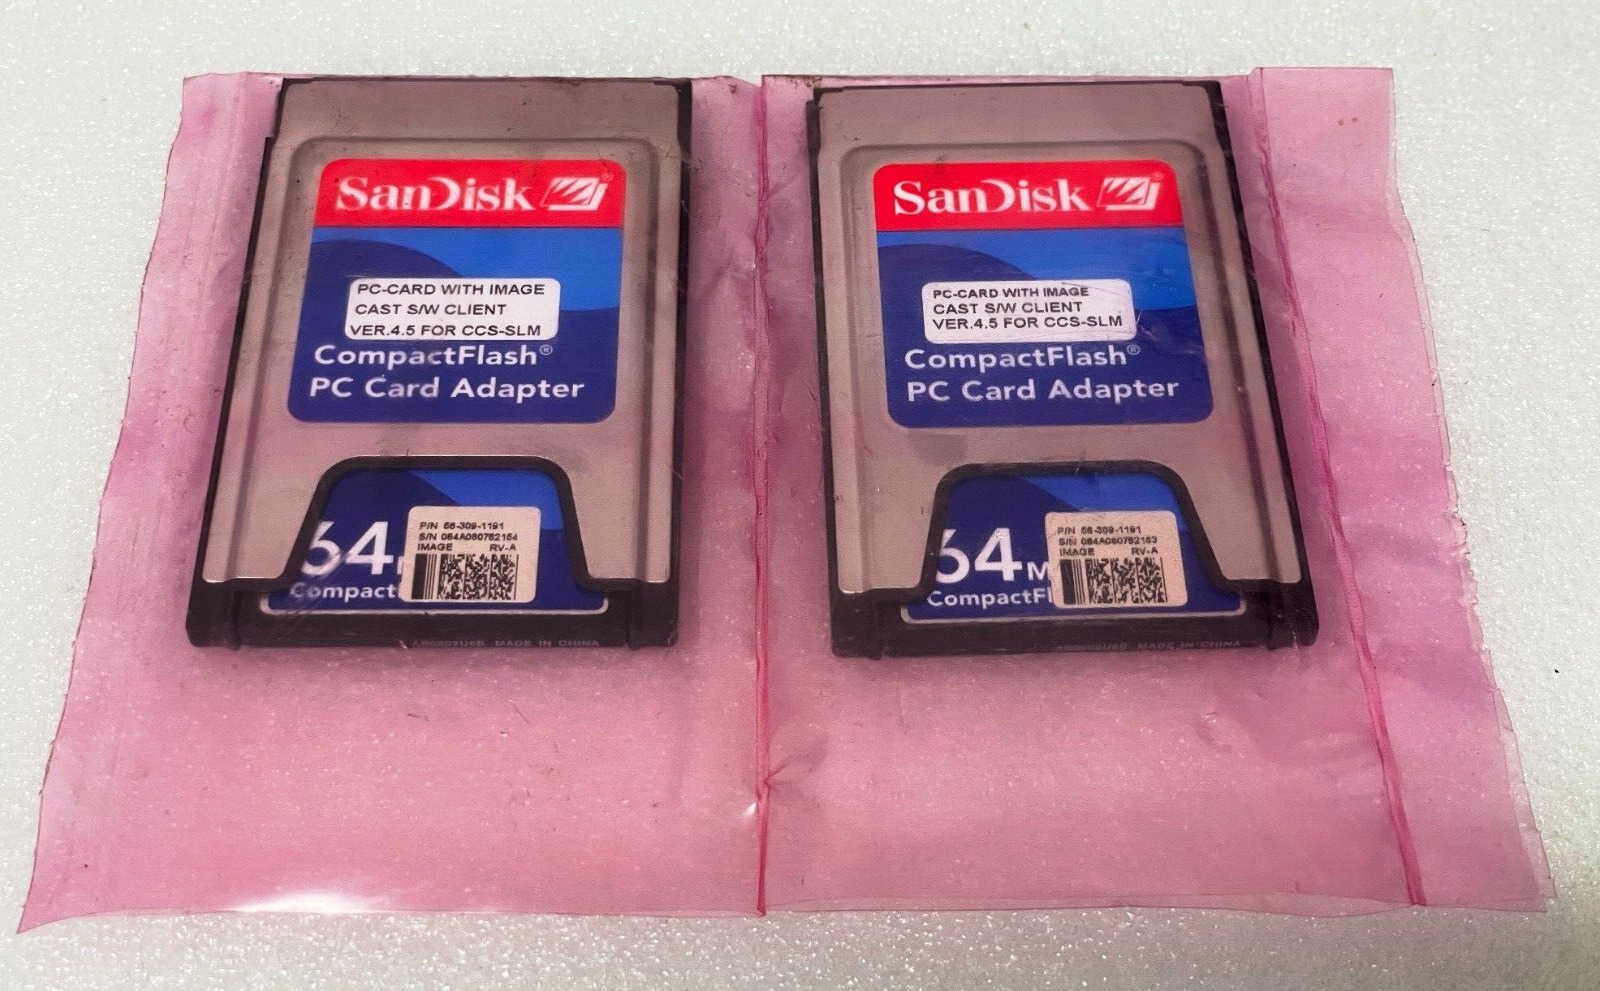 LOT OF 2 x SDCFJ-64-388/03 SanDisk CompactFlash PC Card Adapter w/64MB Card